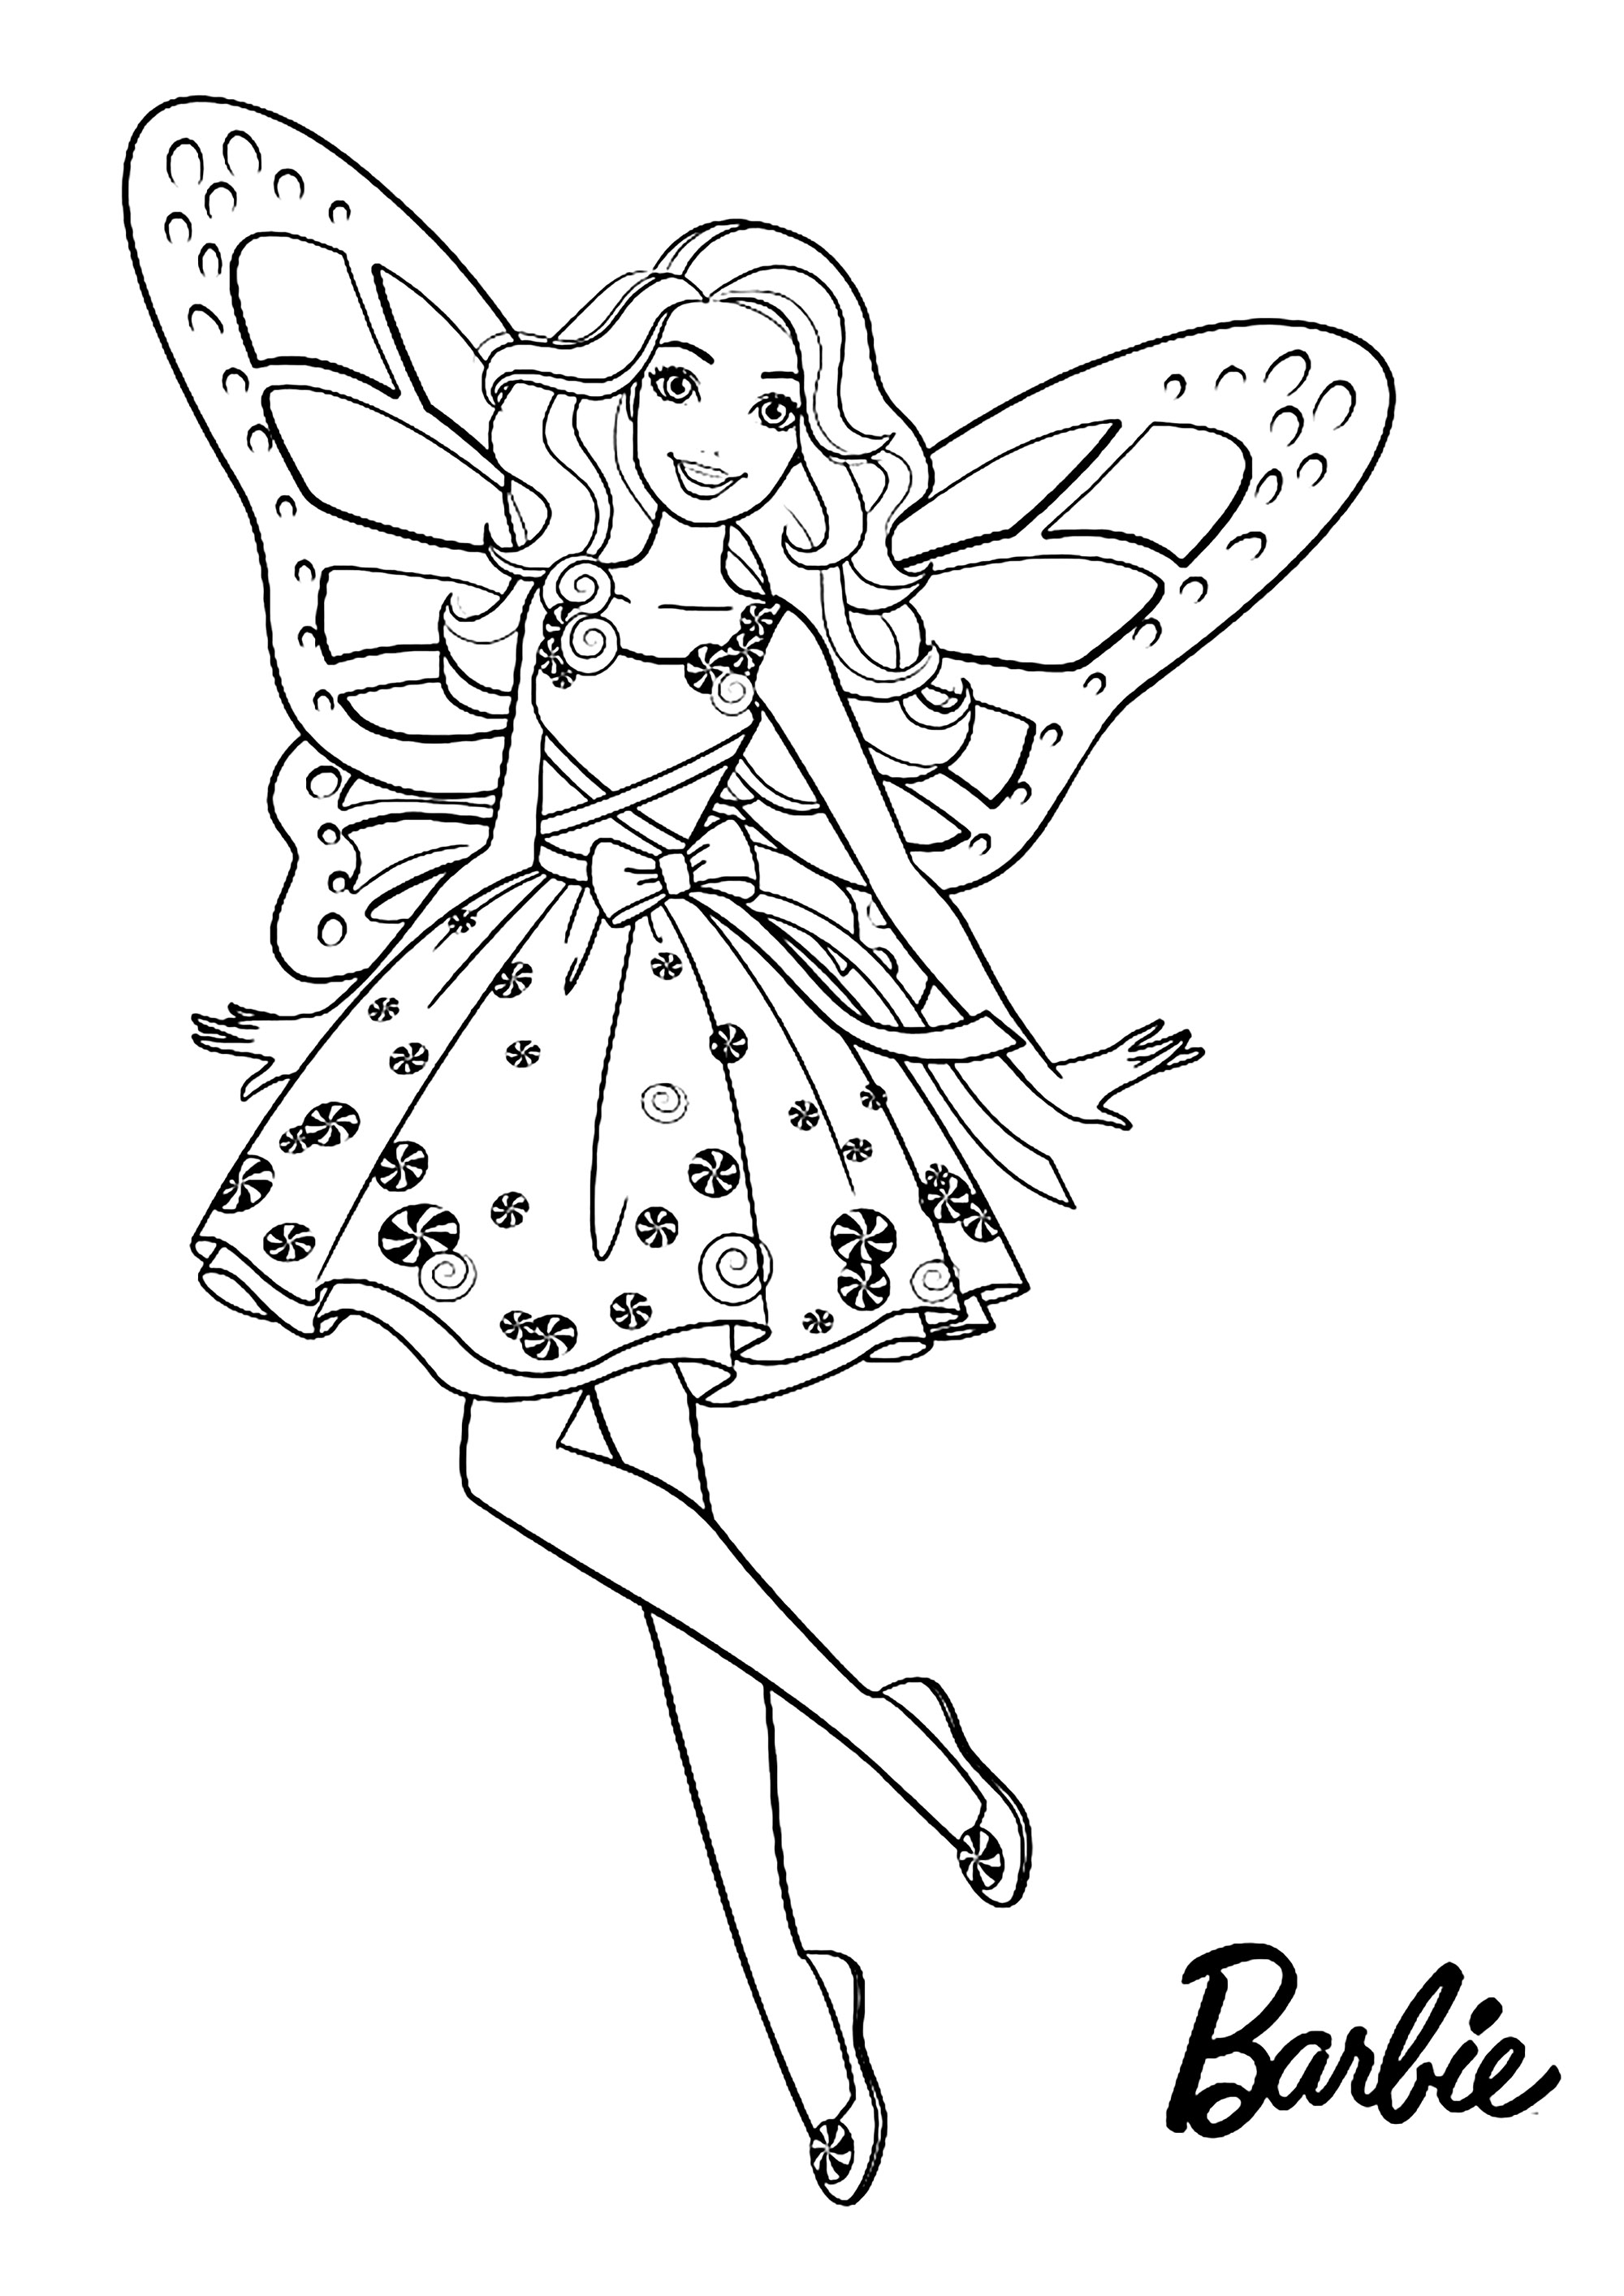 Butterfly Barbie - Barbie Kids Coloring Pages